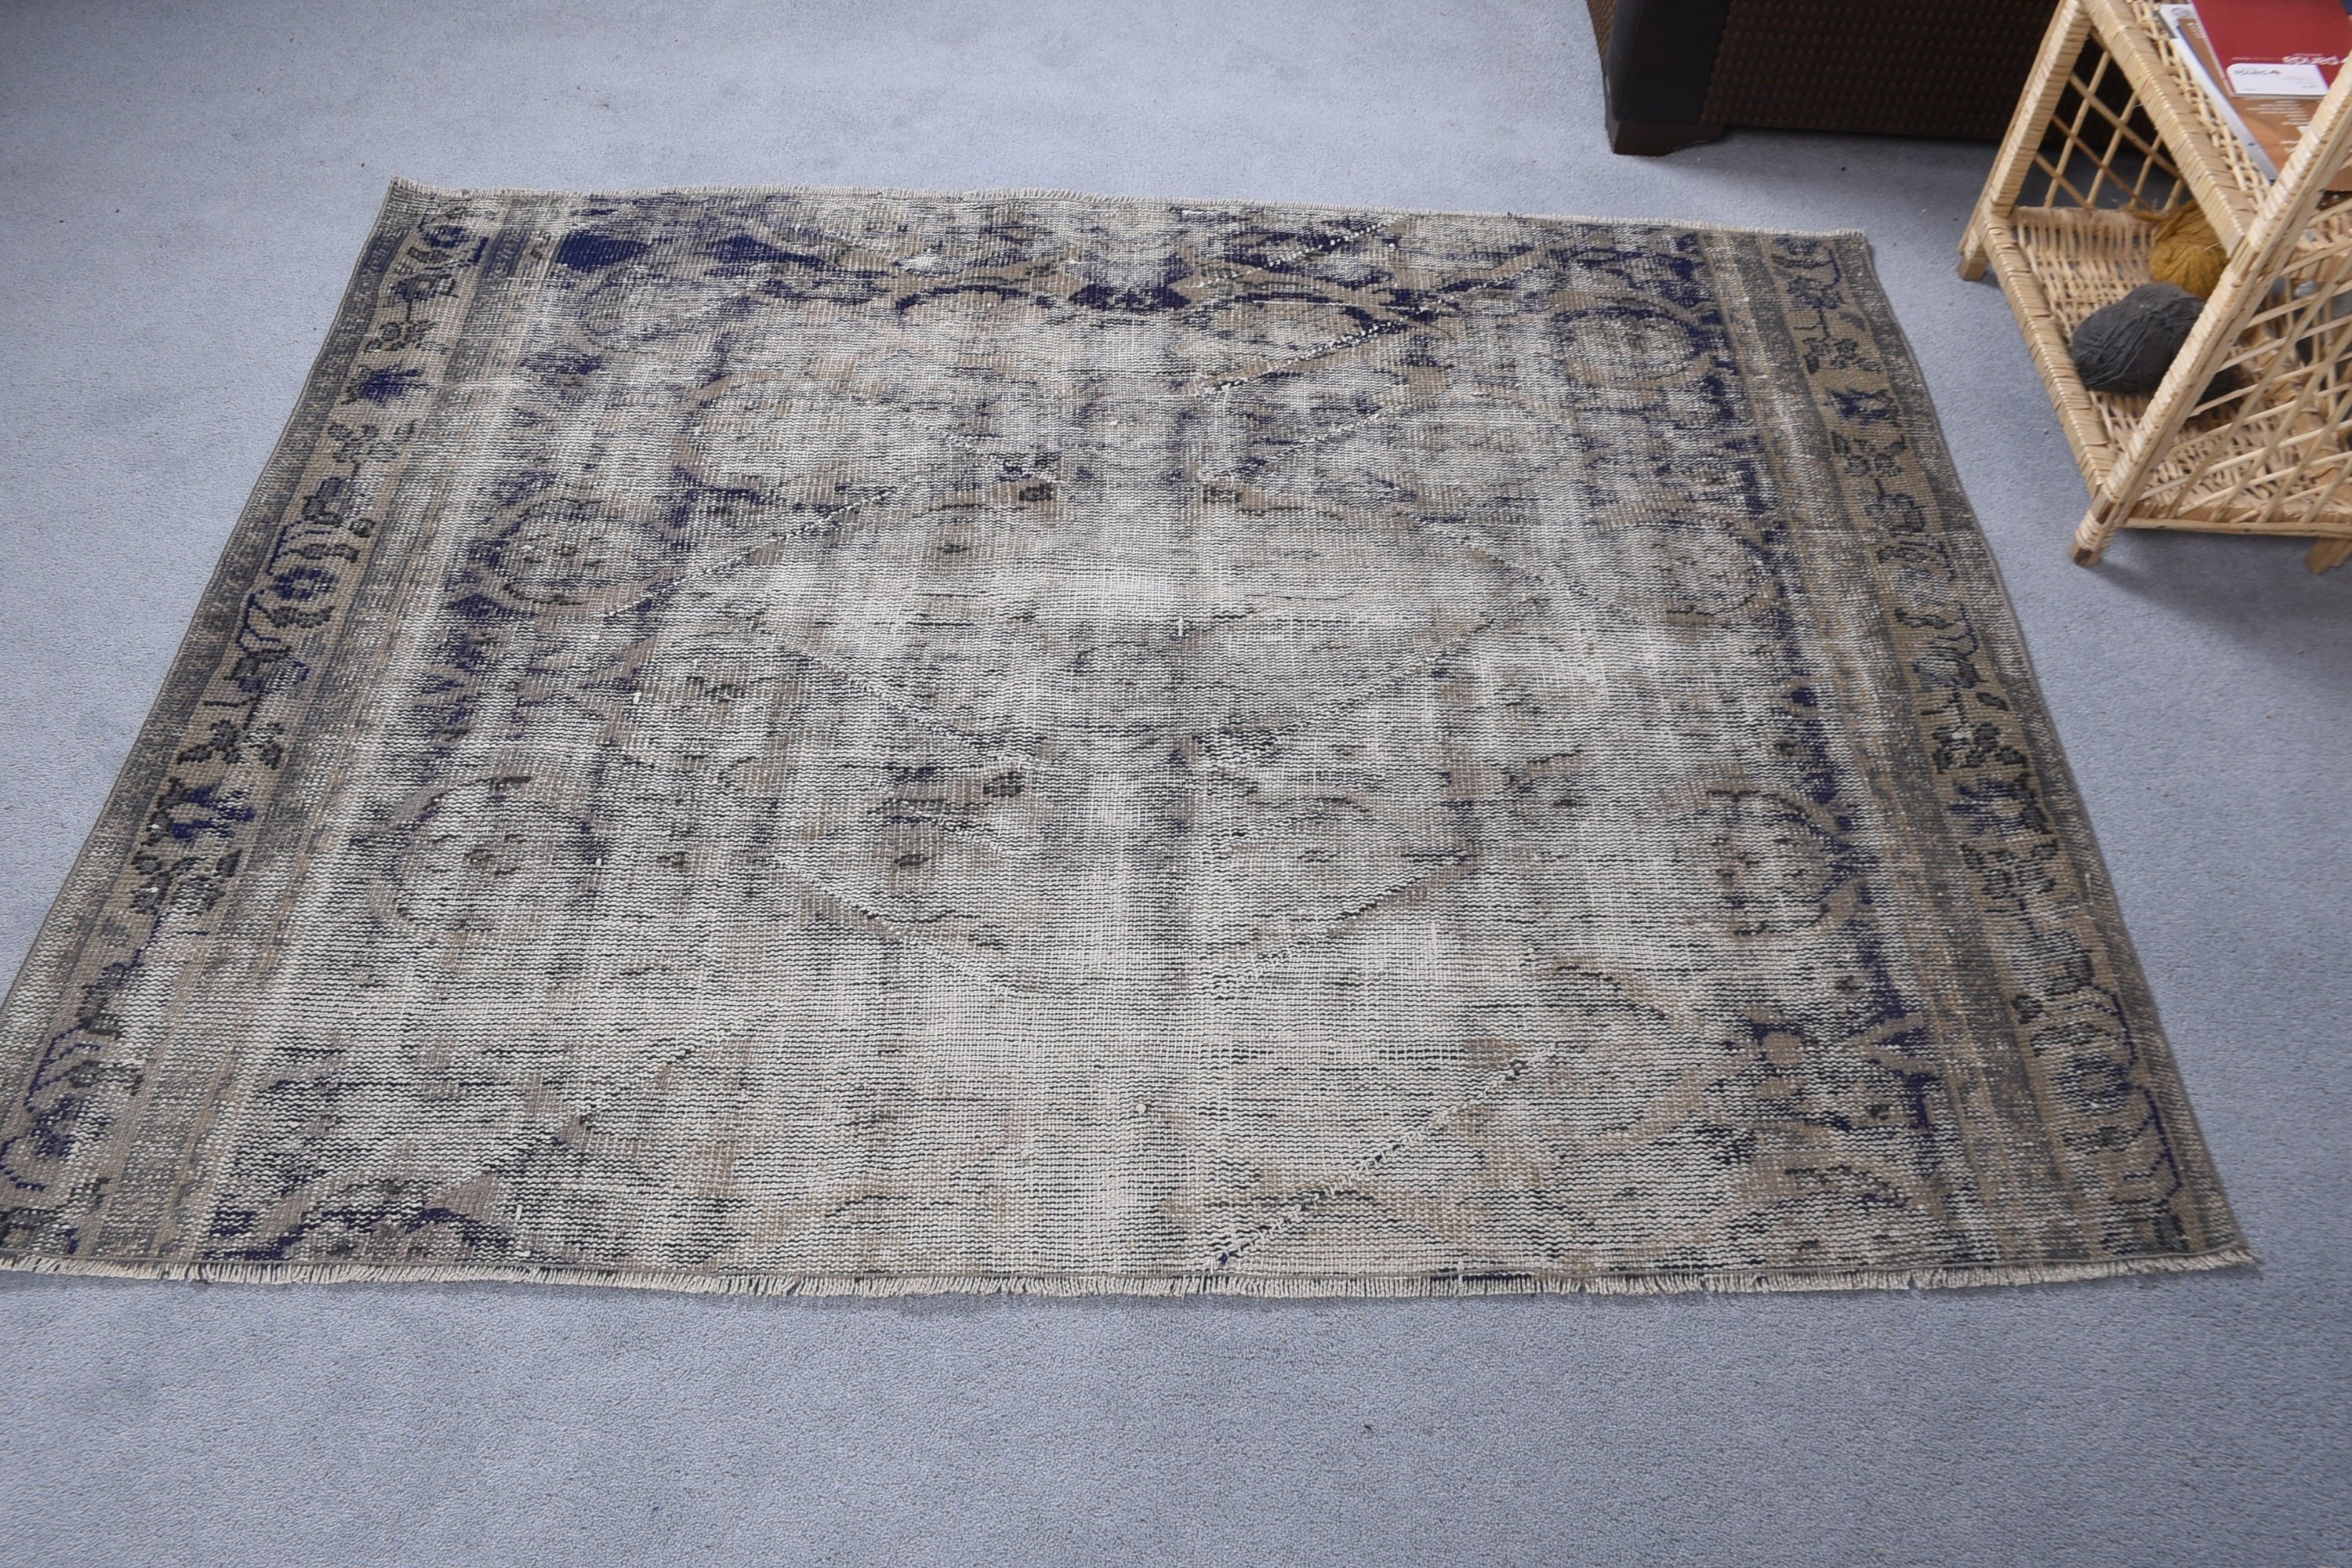 Bedroom Rug, Blue Anatolian Rug, Moroccan Rugs, Turkish Rug, 5.7x4.2 ft Accent Rug, Home Decor Rug, Rugs for Entry, Entry Rug, Vintage Rug